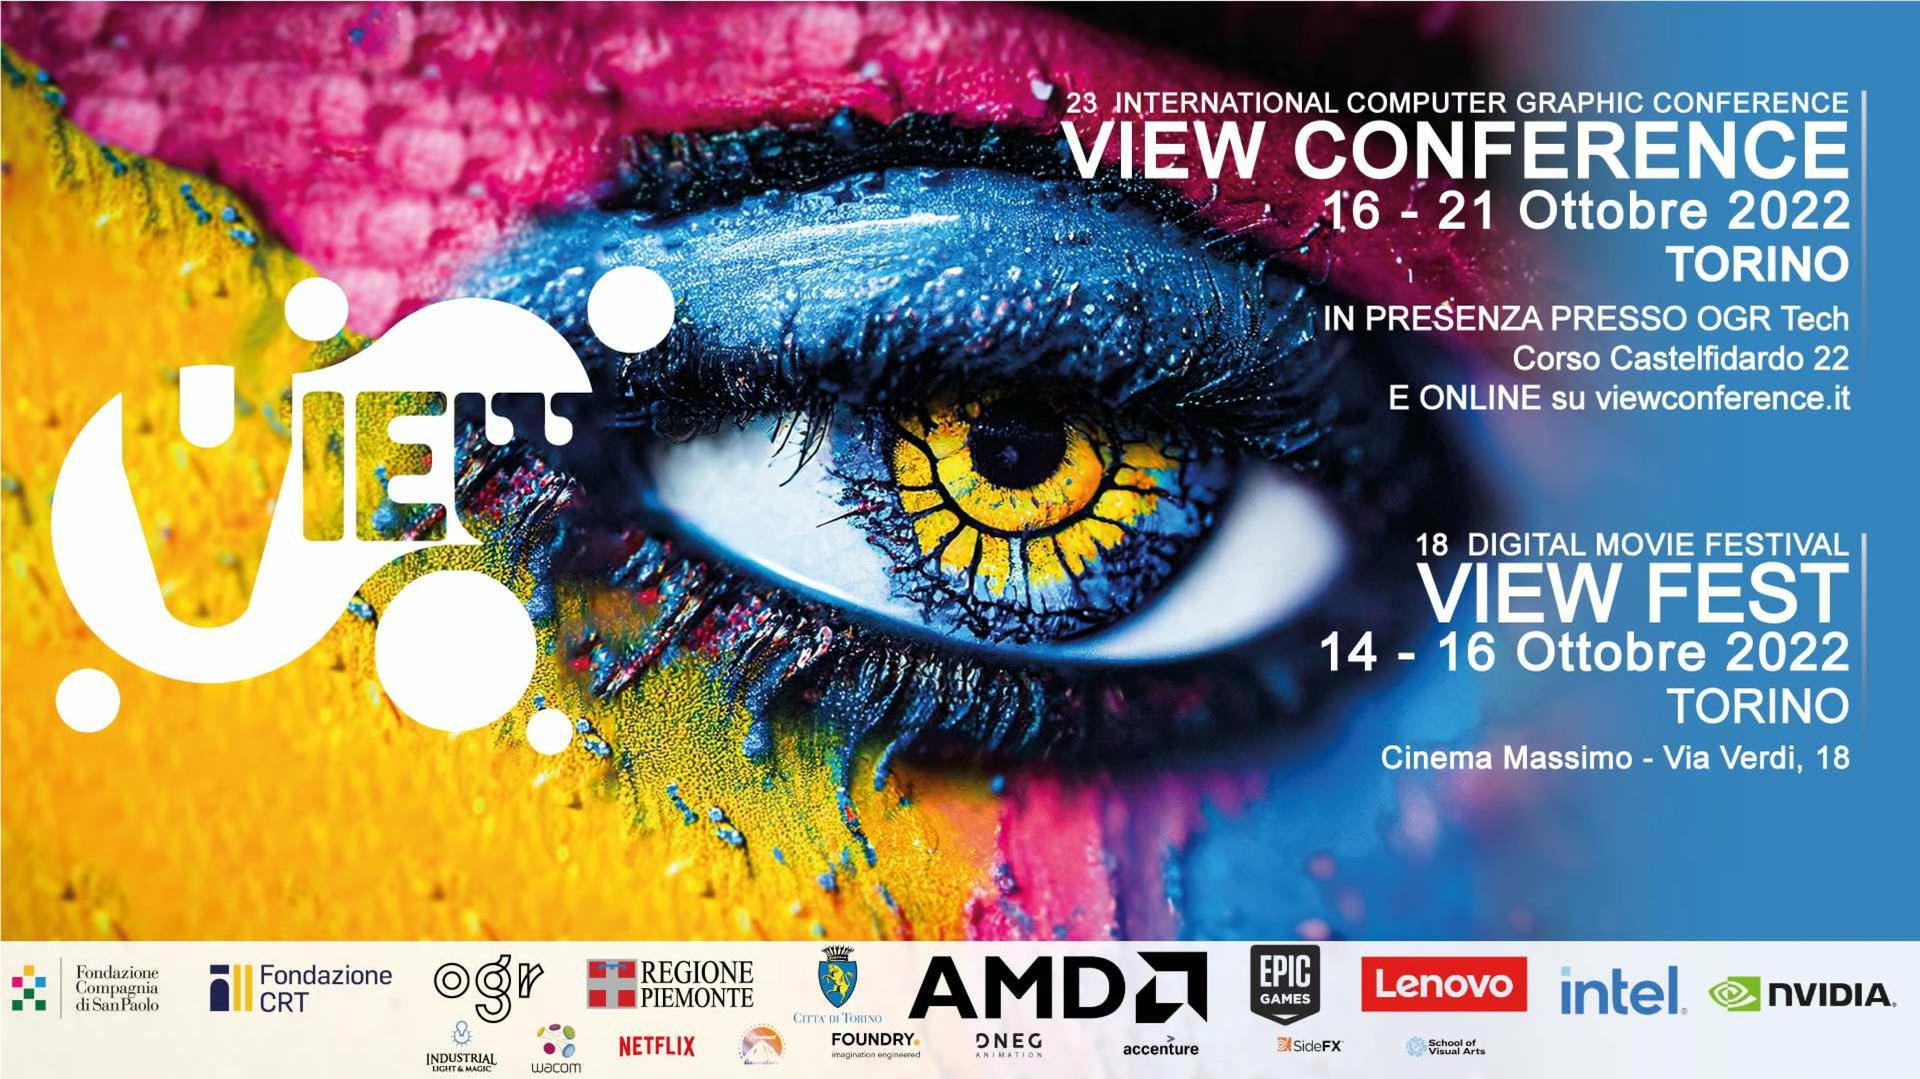 View Conference 2022